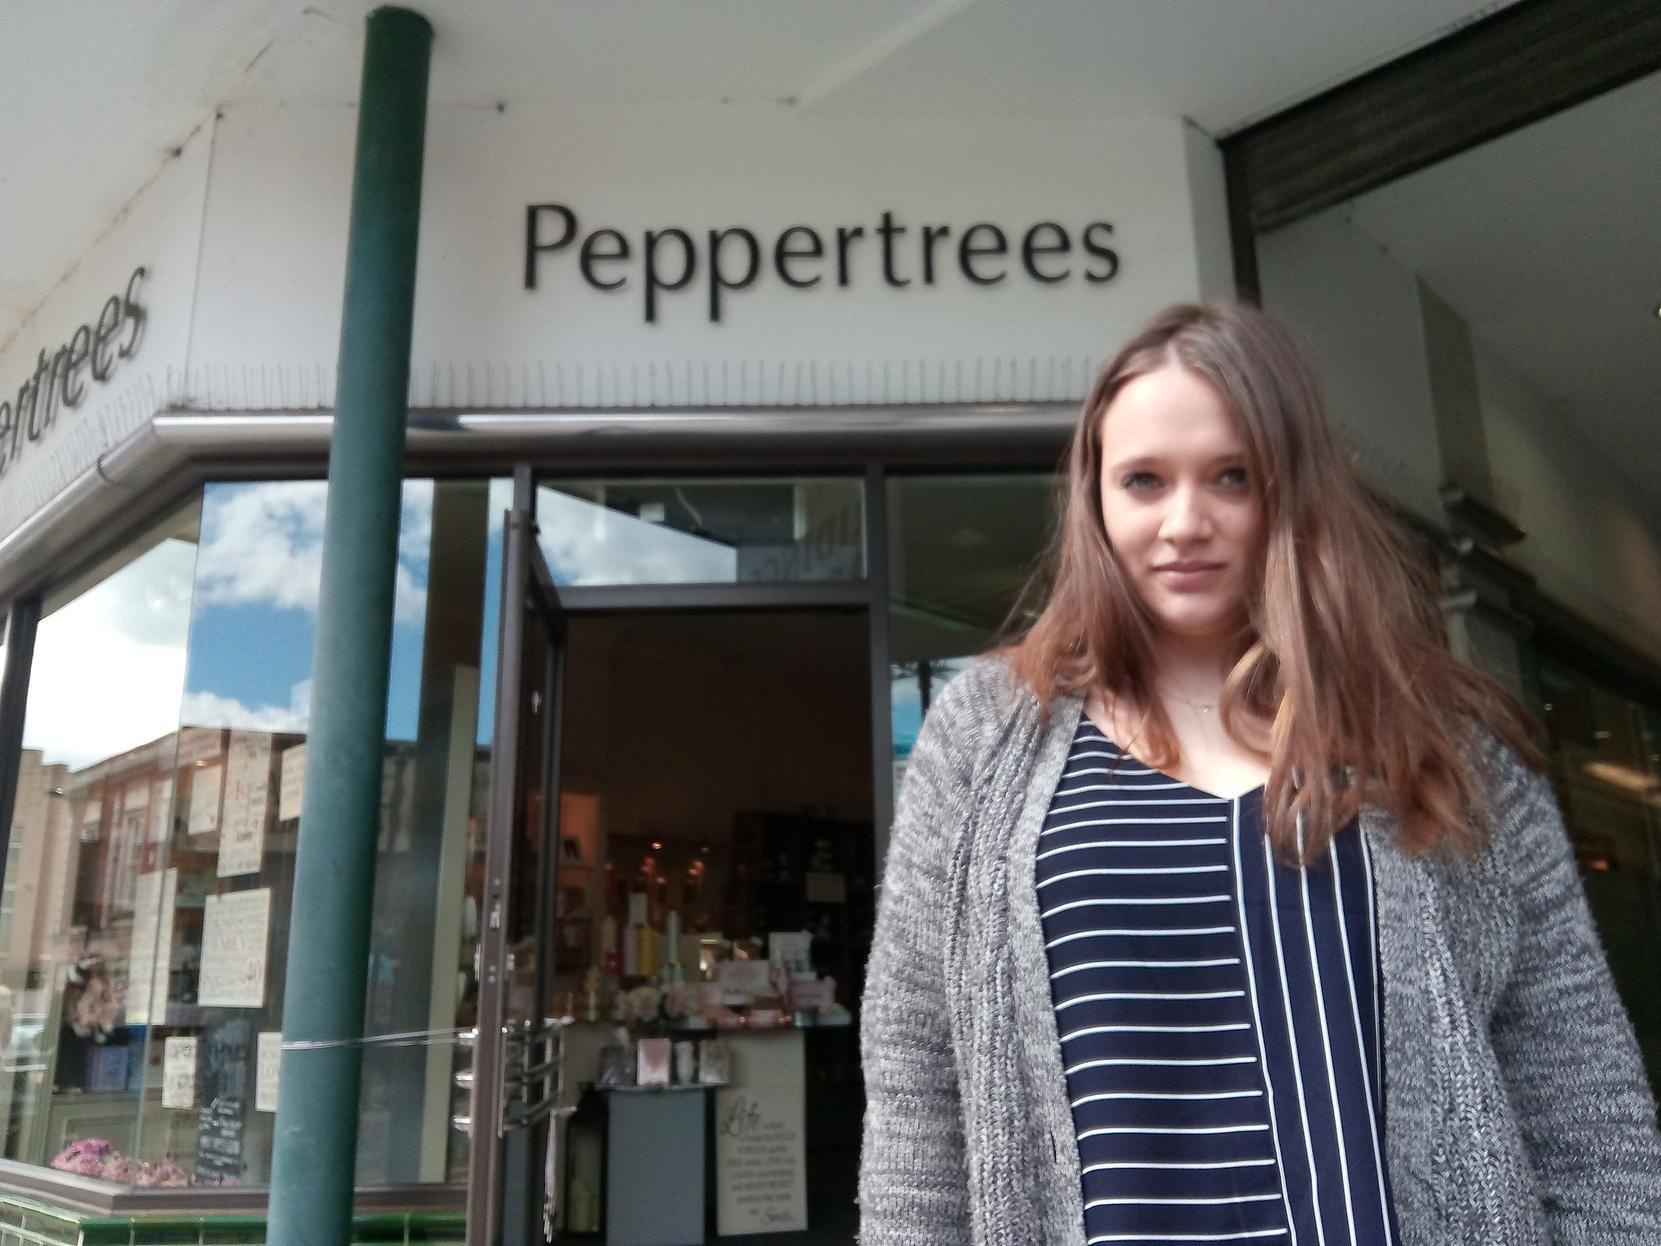 Gift shop Peppertrees in the Ridings Arcade closed at the end of May 2019, with owner Megan Eyles citing a decrease in footfall for the decision to shut